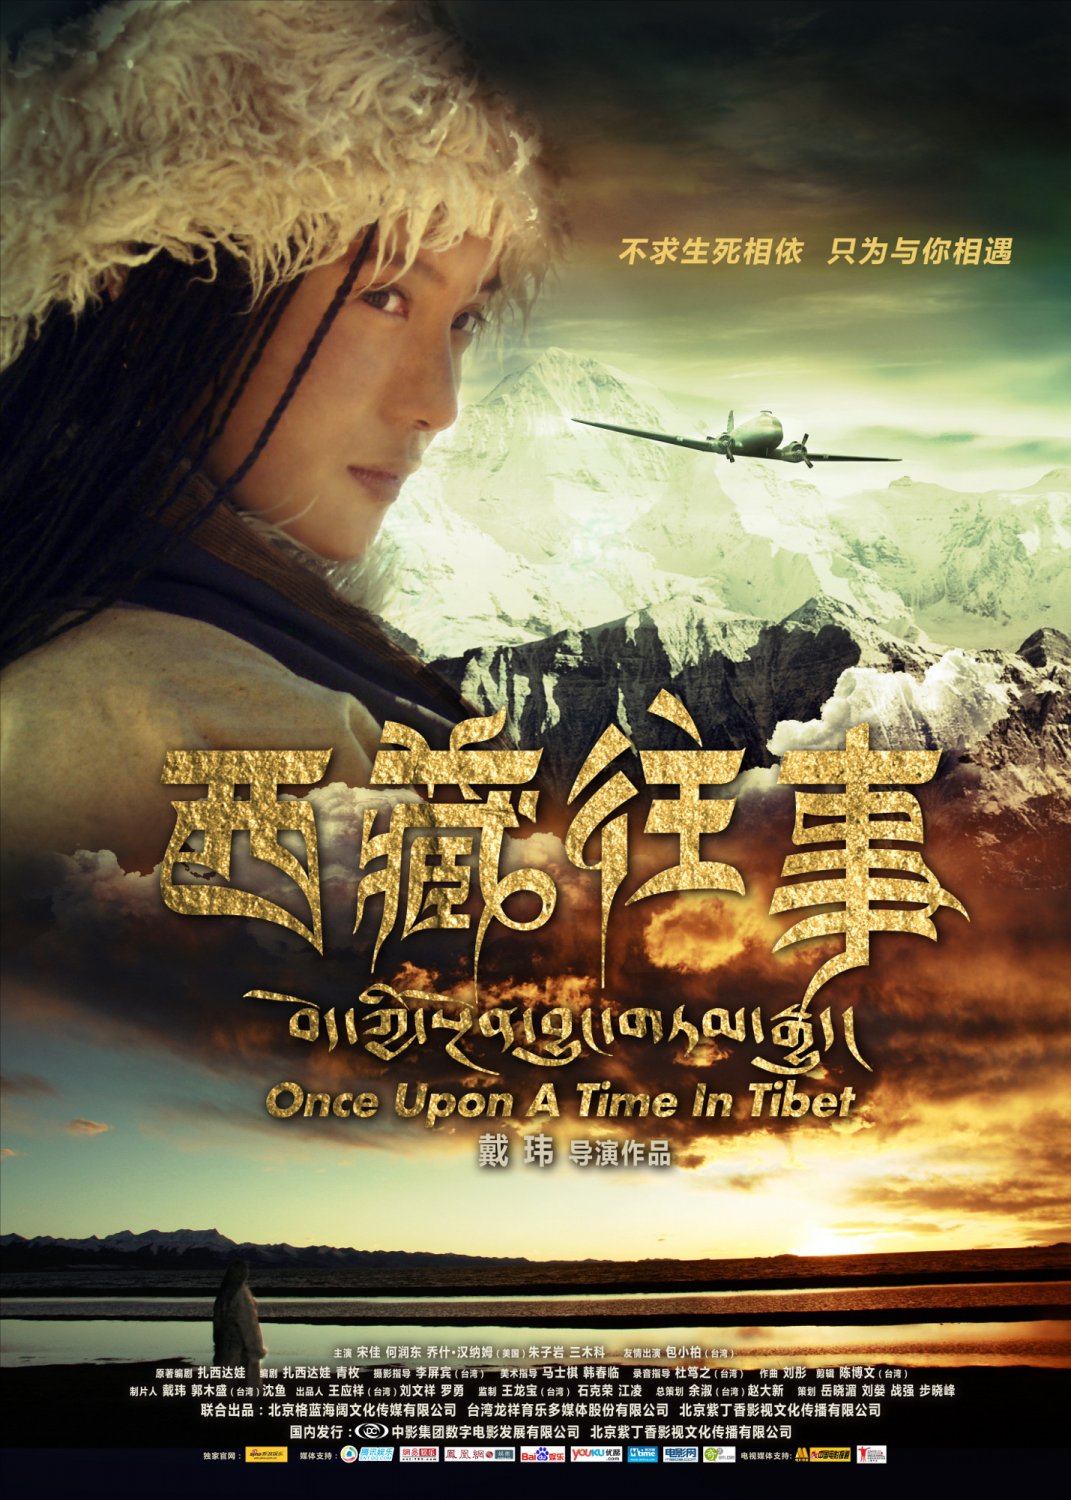 Extra Large Movie Poster Image for Once Upon a Time in Tibet (#4 of 4)